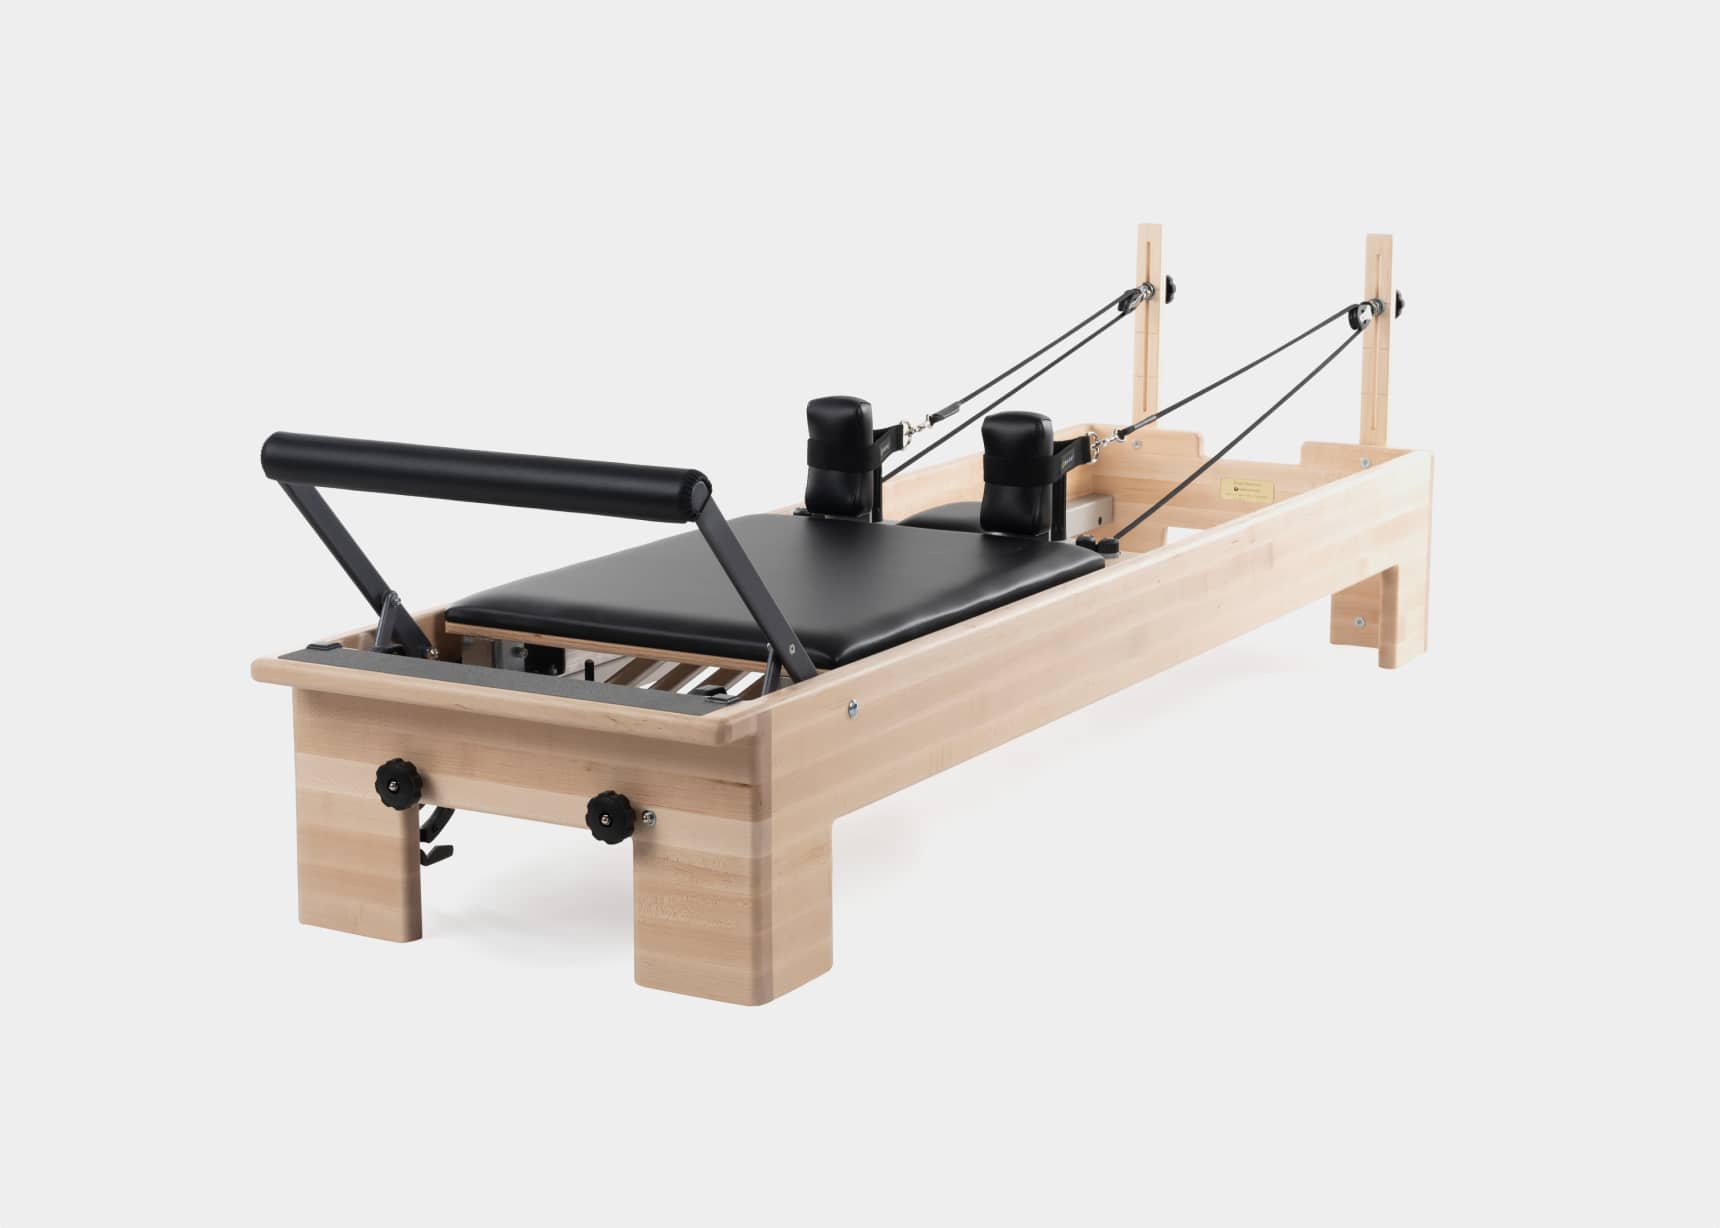 Introducing: the Studio Reformer® by Balanced Body®